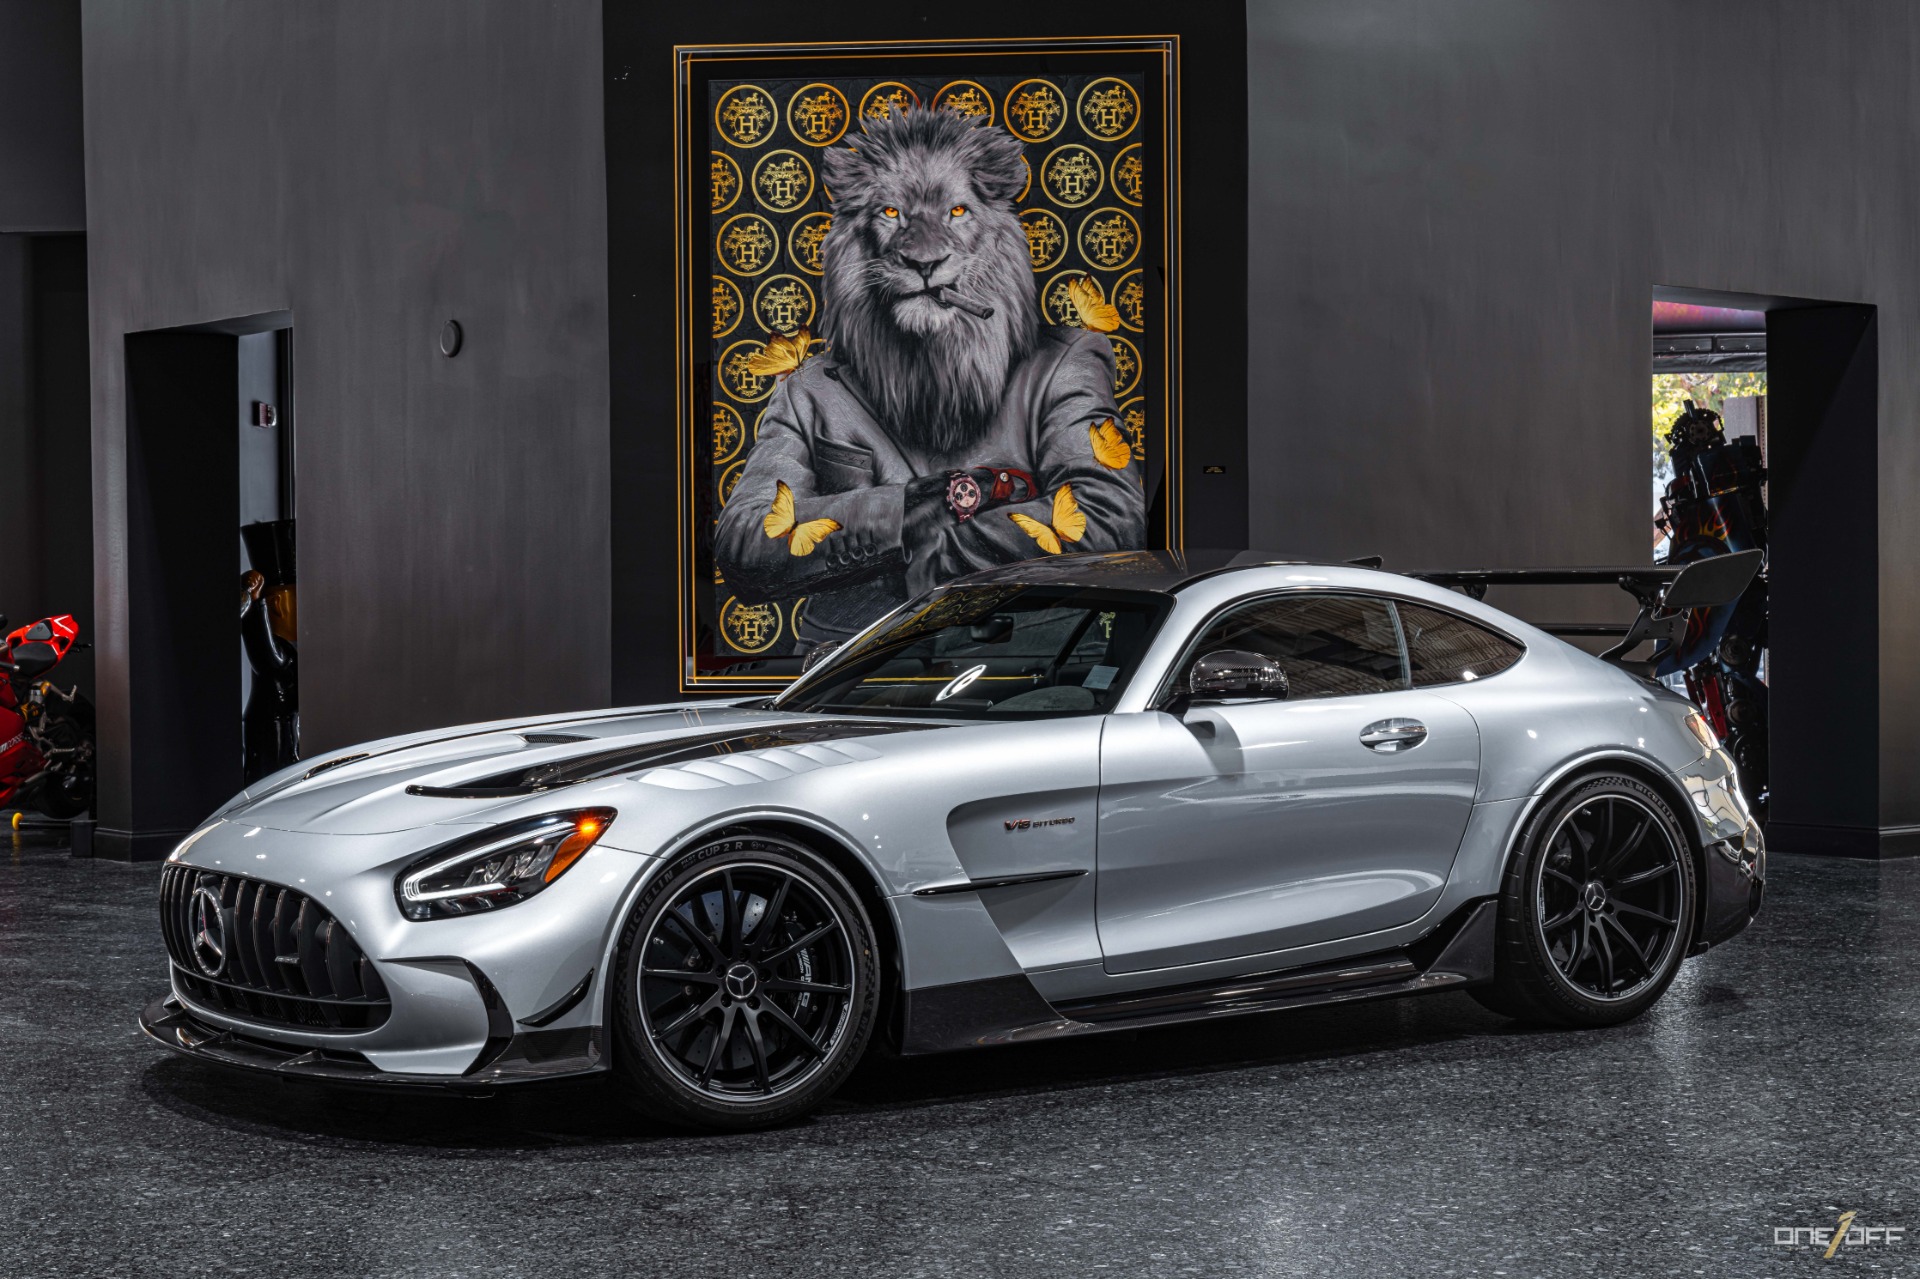 Used 2021 Mercedes-Benz AMG GT Black Series w/ Full PPF For Sale